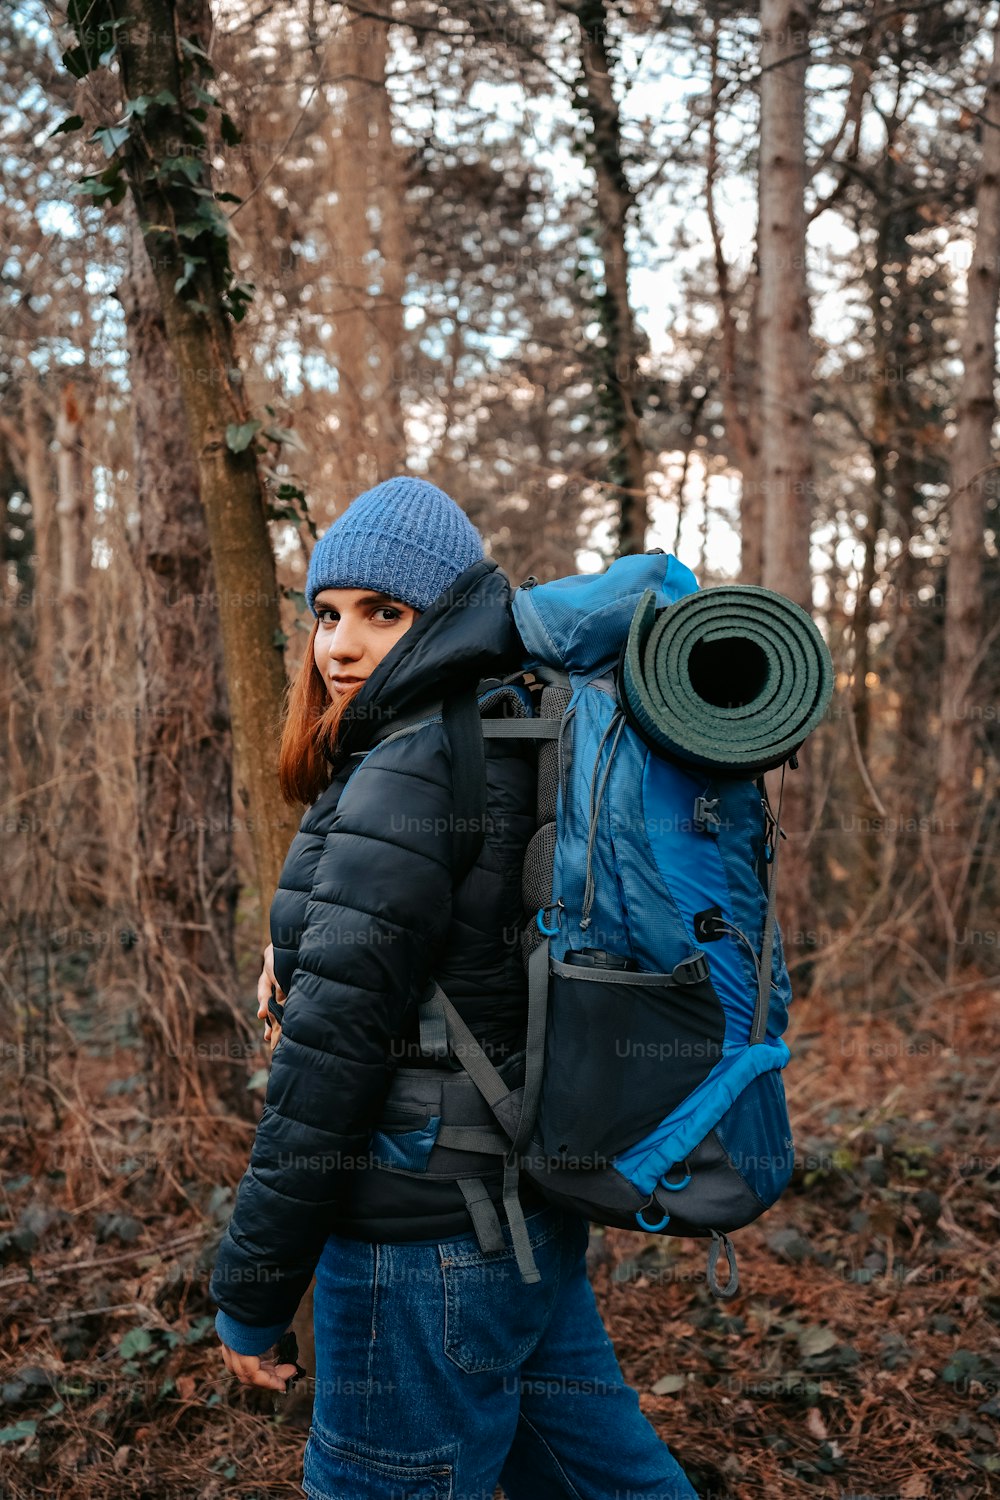 a woman walking through a forest carrying a blue backpack